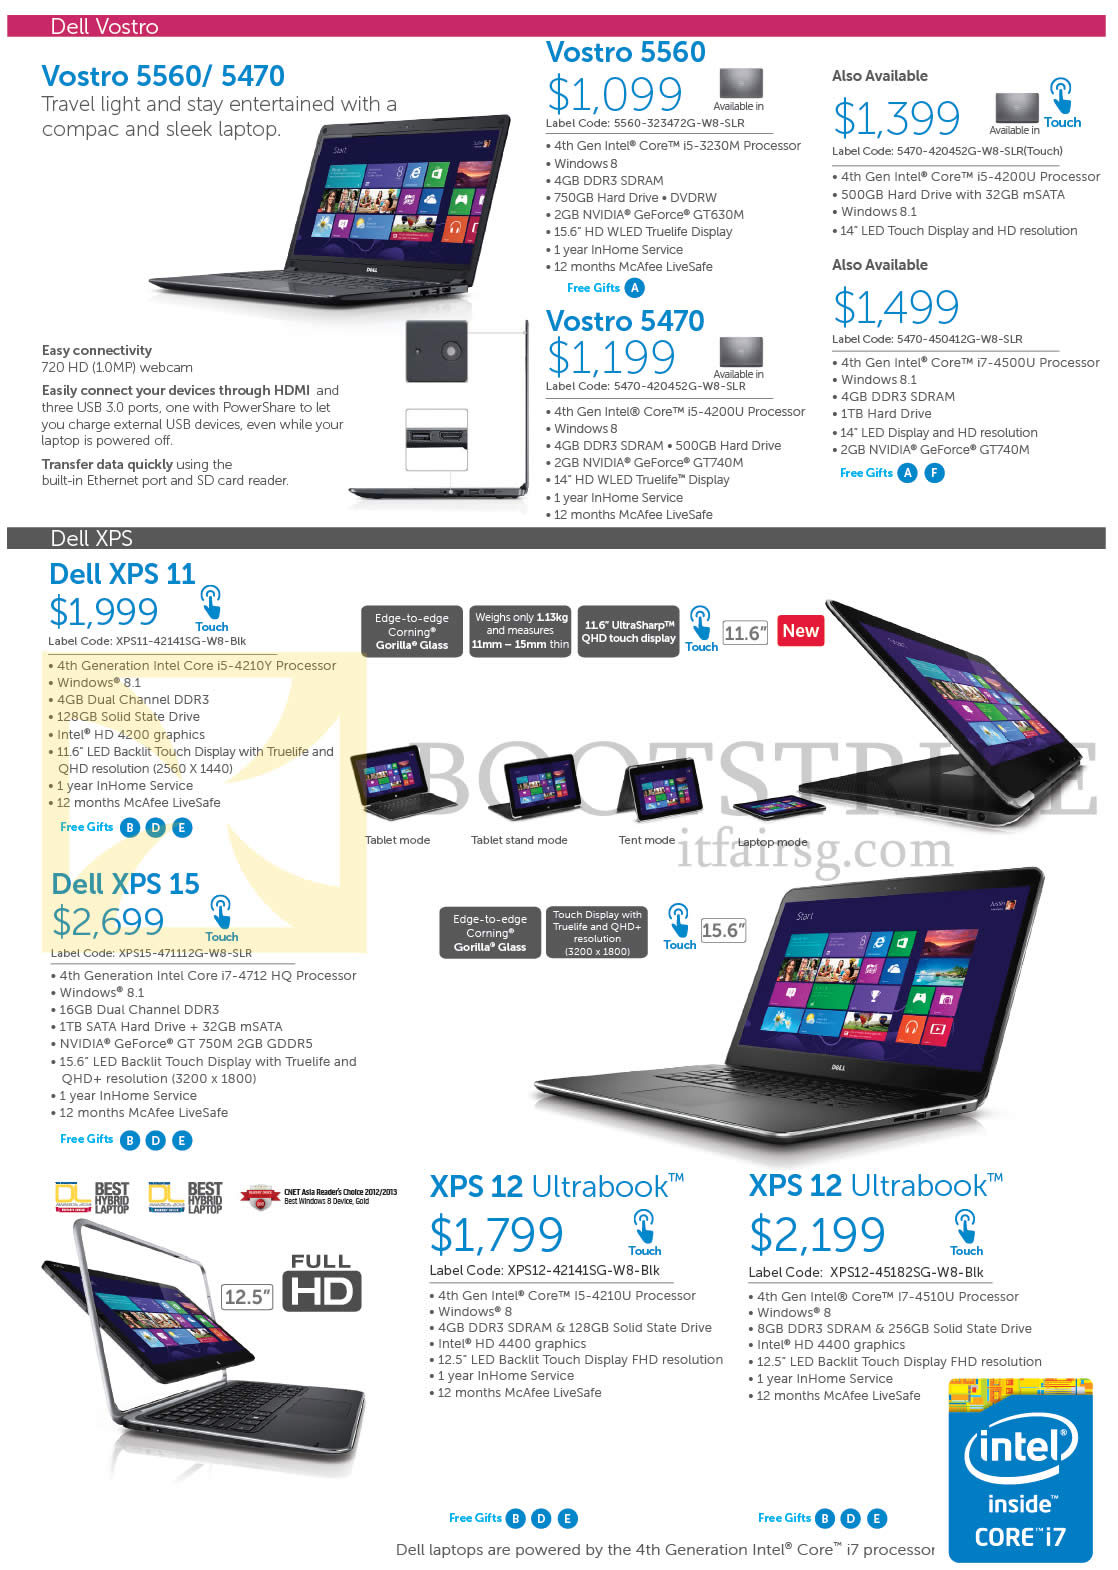 PC SHOW 2014 price list image brochure of Dell Notebooks Vostro 5560, 5470, XPS 11, 15, 12